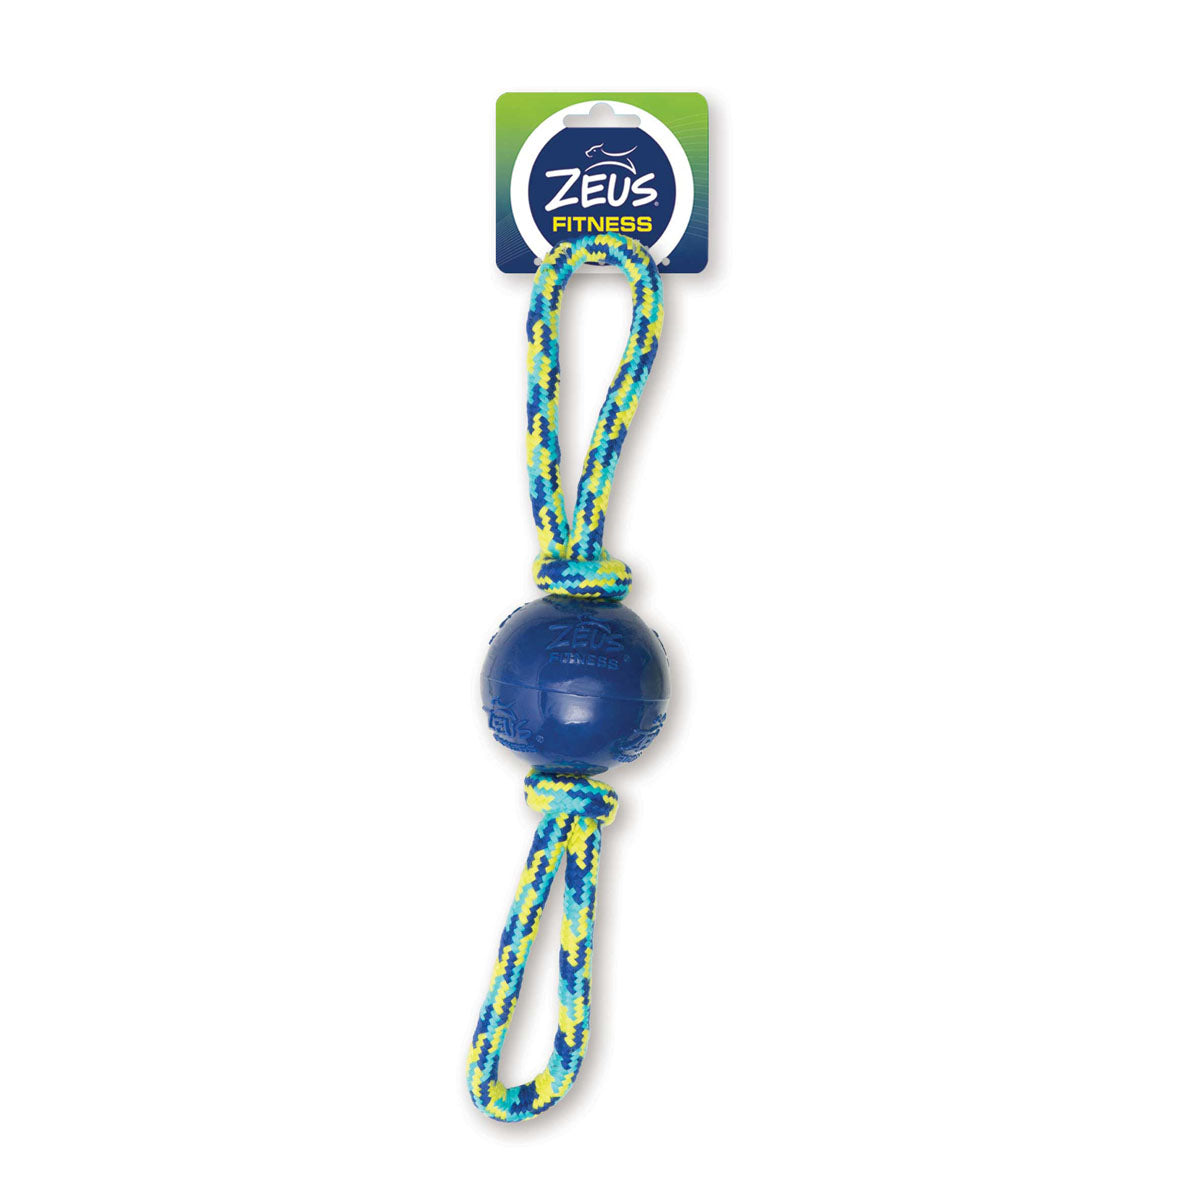 Zeus Fitness Dog Toys Ball Double tug with TPR ball 41cm